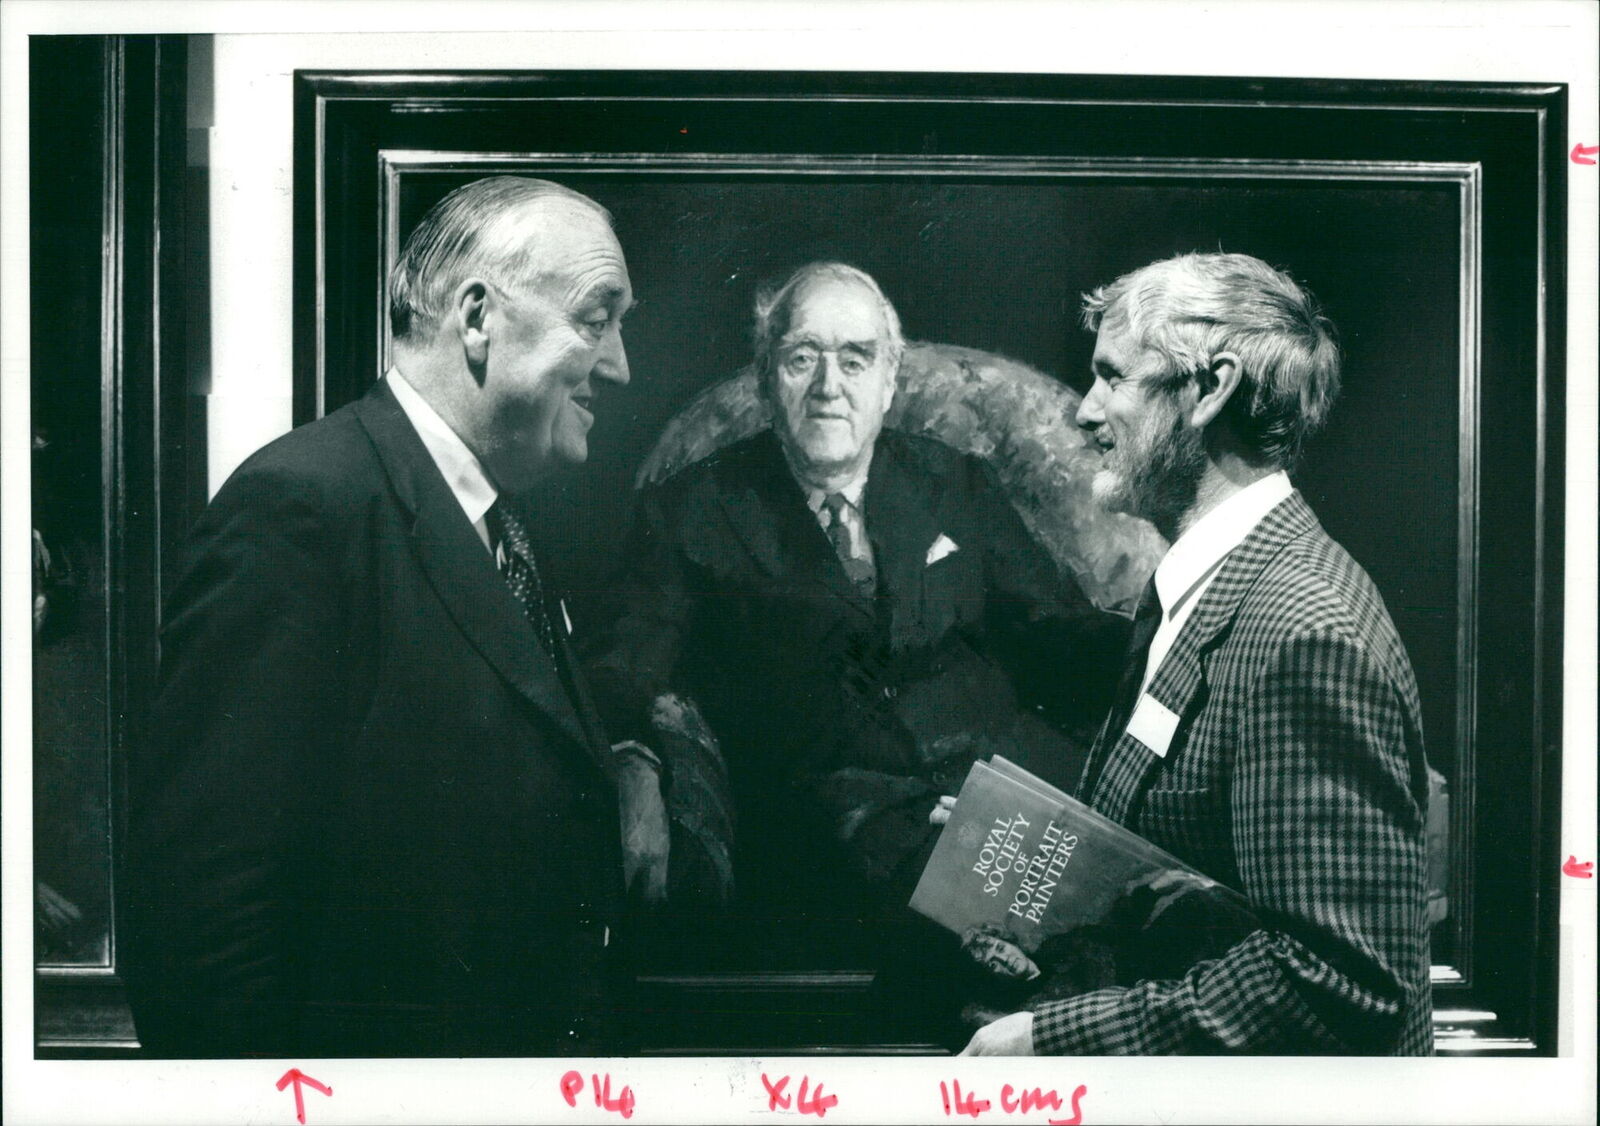 Viscount William Whitelaw discussing about his... - Vintage Photograph 1405635